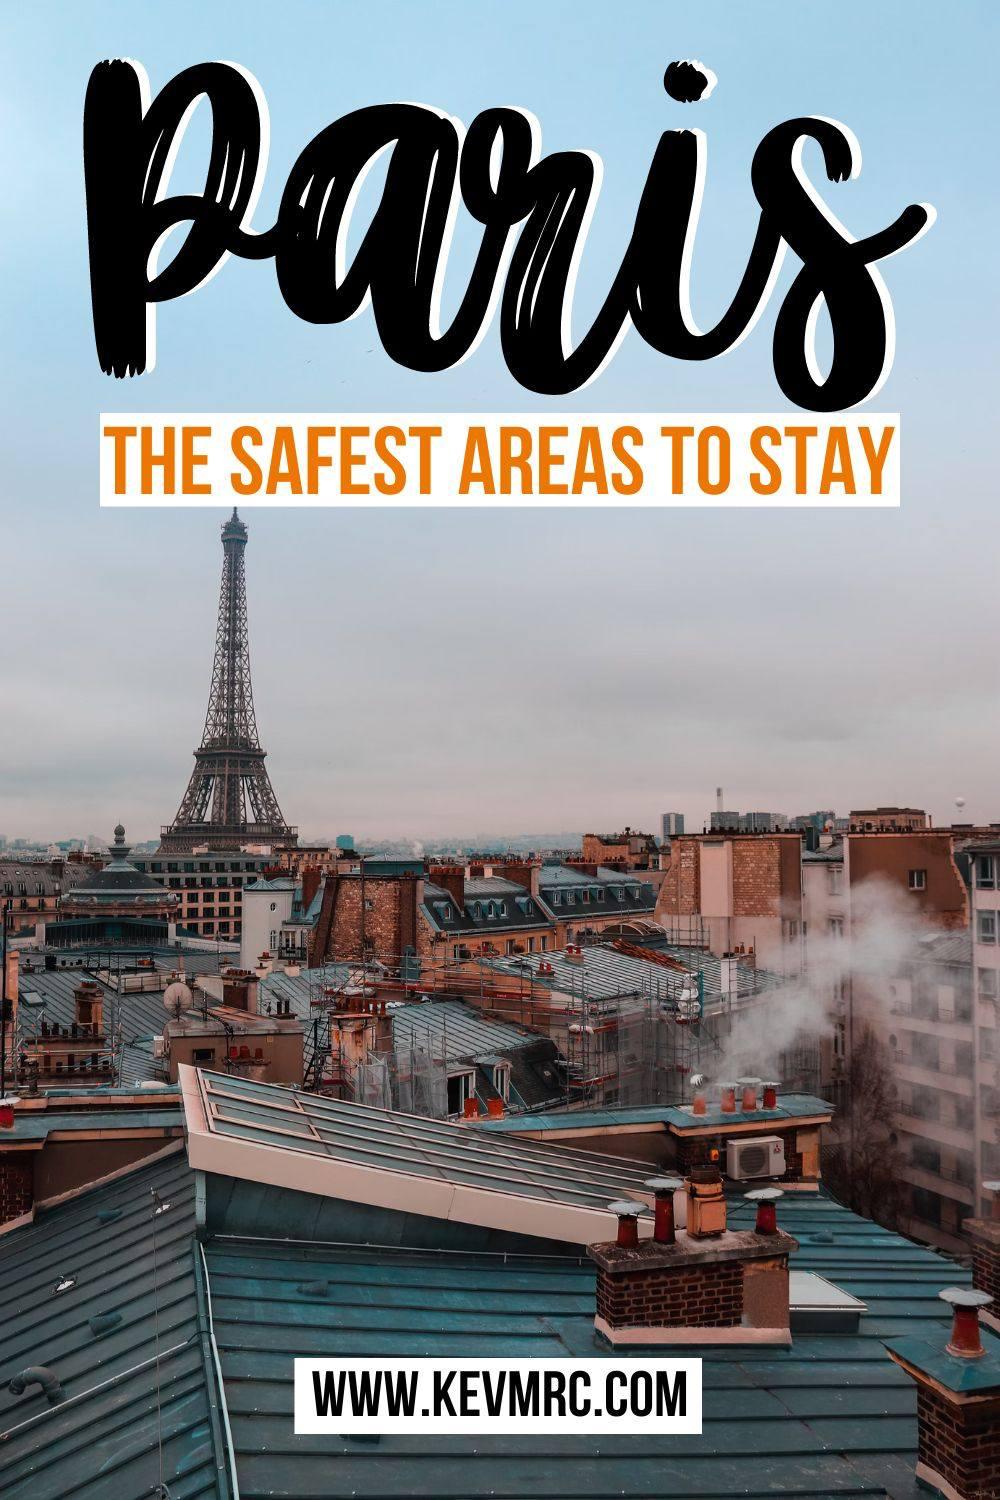 Looking for a safe place to stay in Paris? Discover in this guide the 10 safest areas in Paris, with pros & cons and hotel options for each area. best areas to stay in paris | best neighborhoods to stay in paris | paris places to stay